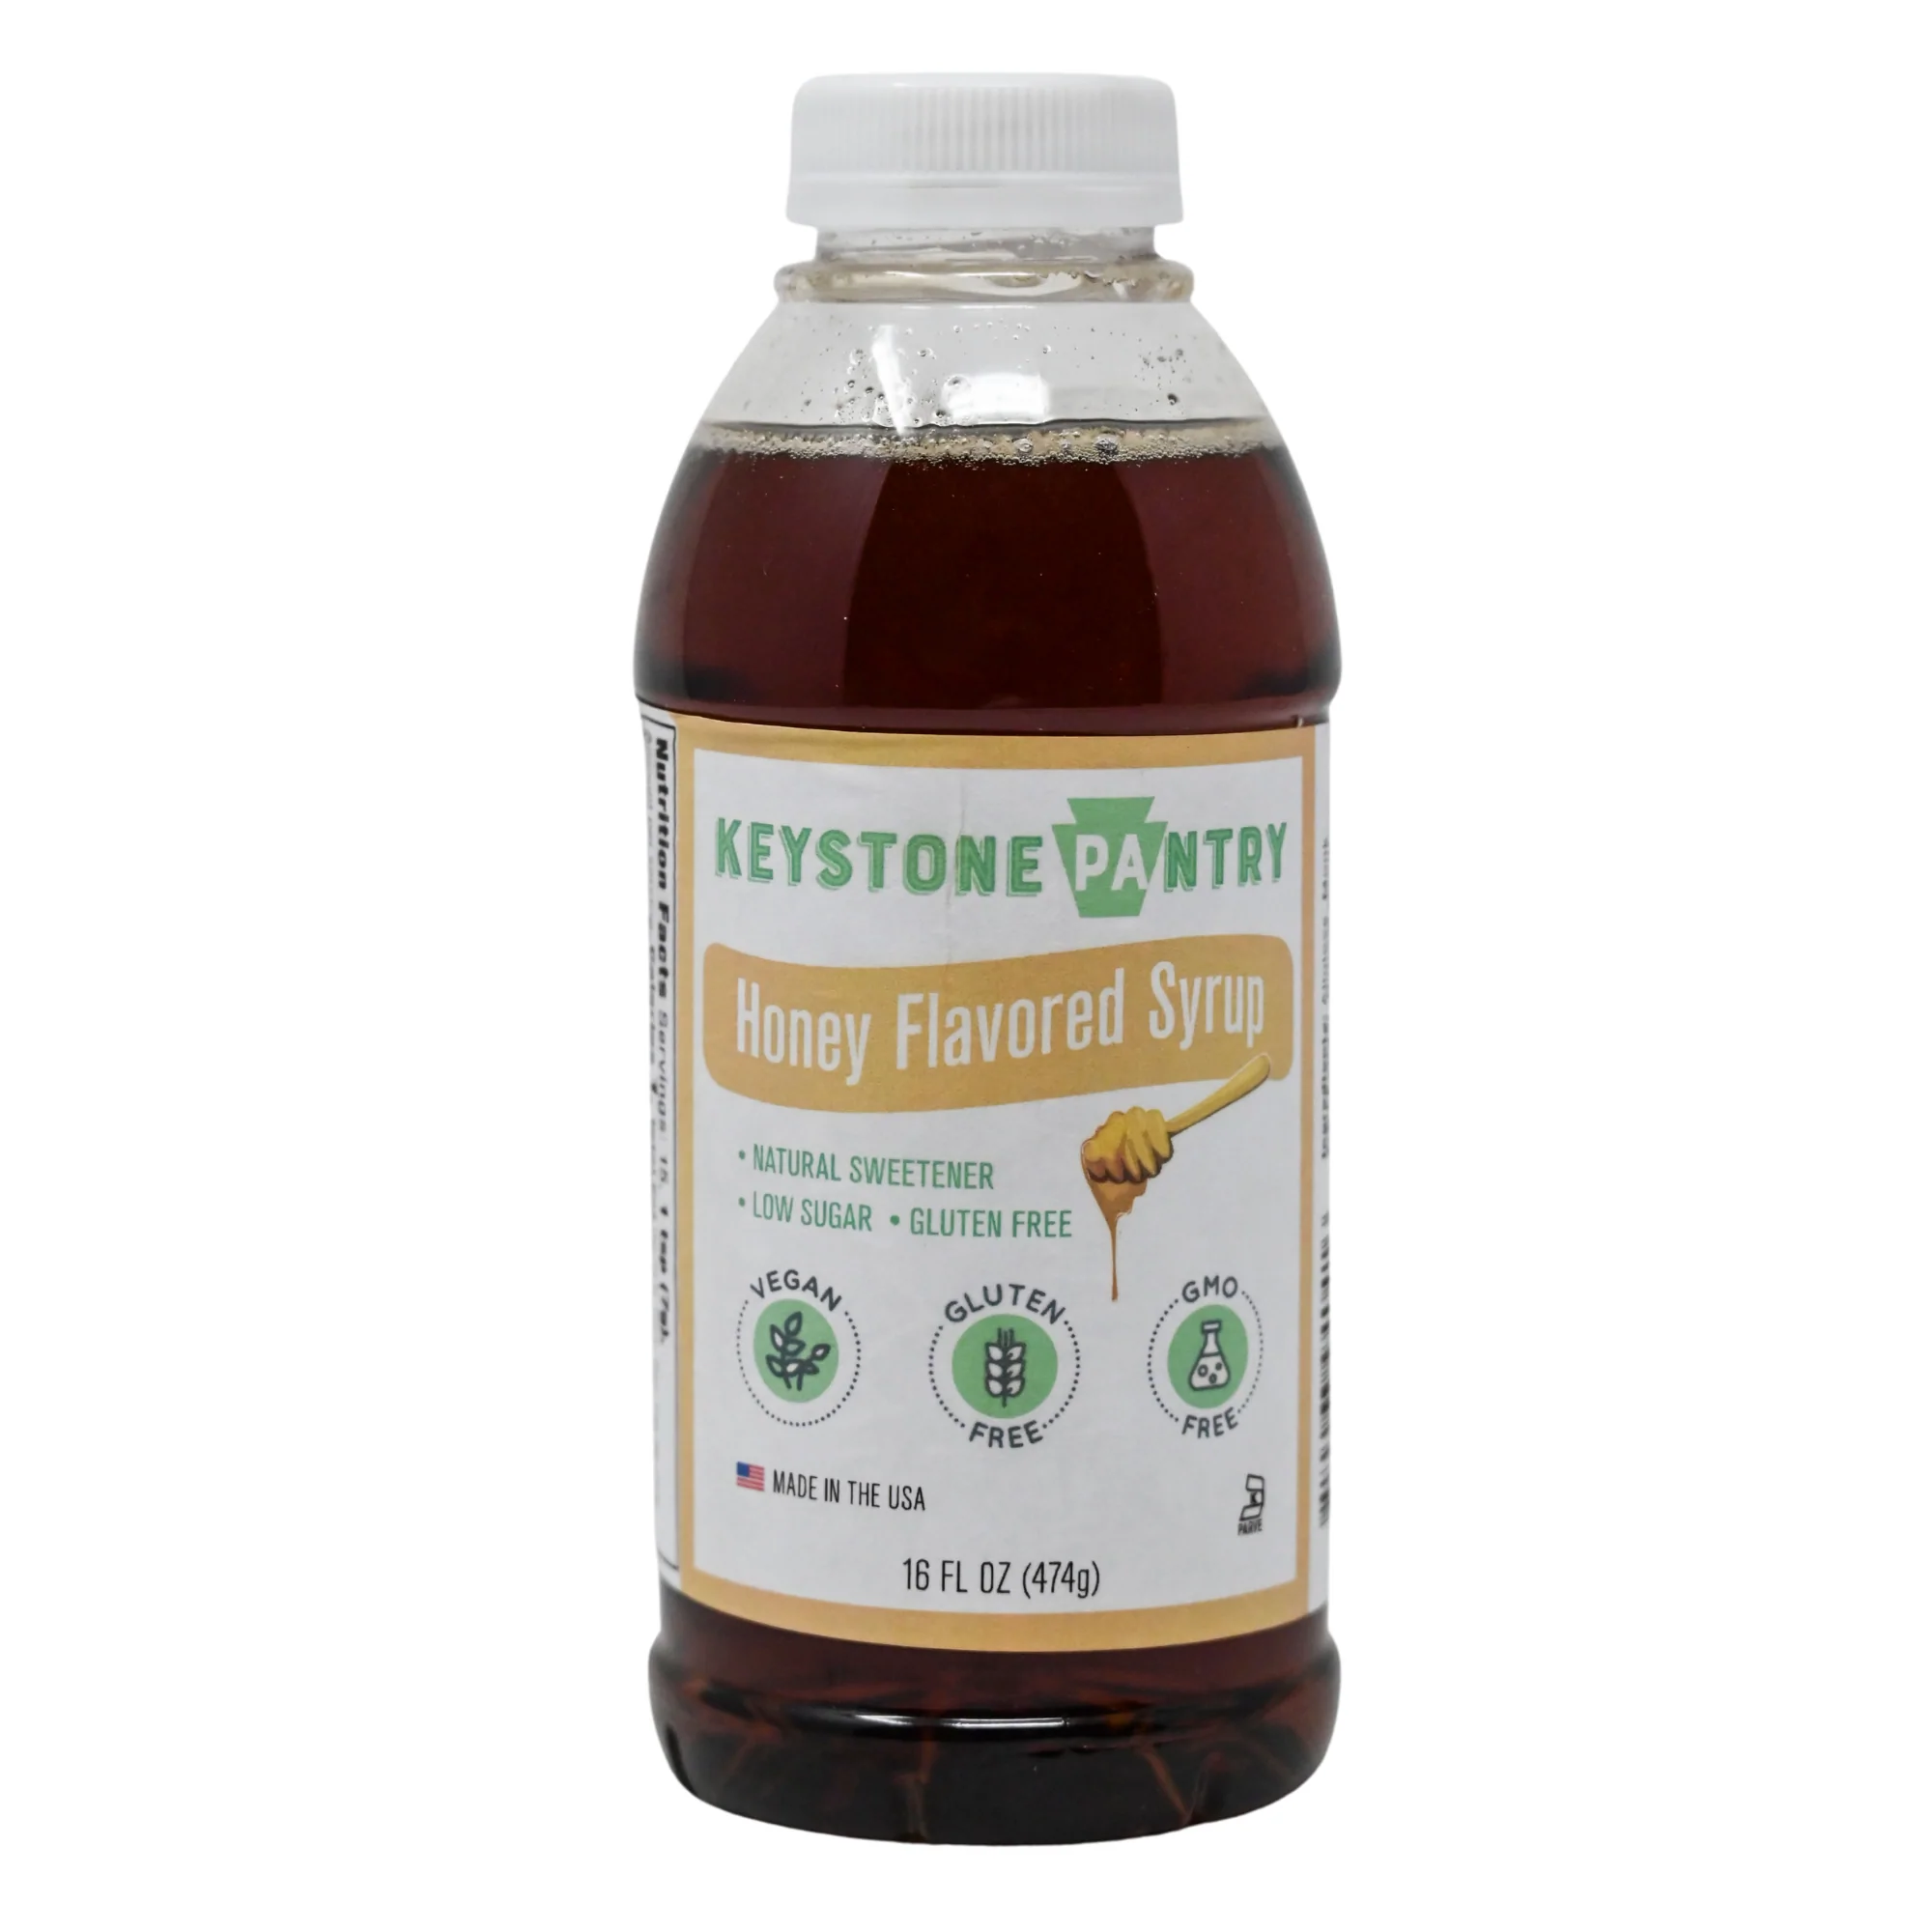 Healthy Alternative Keystone Pantry Honey Flavored Syrup with Monk Fruit